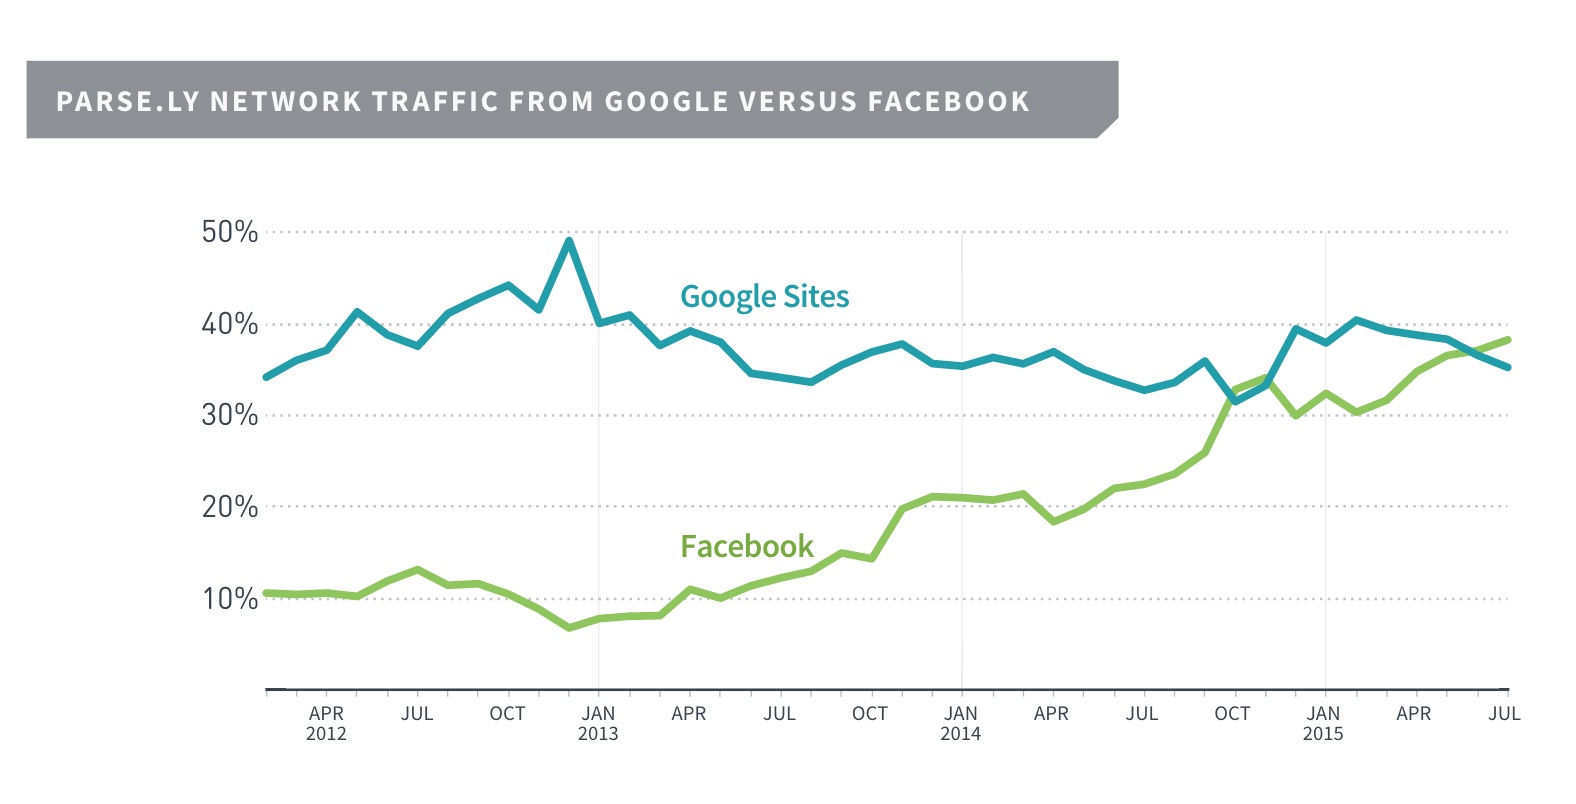 Figure 2 - Parse.ly Network Traffic from Google Versus Facebook